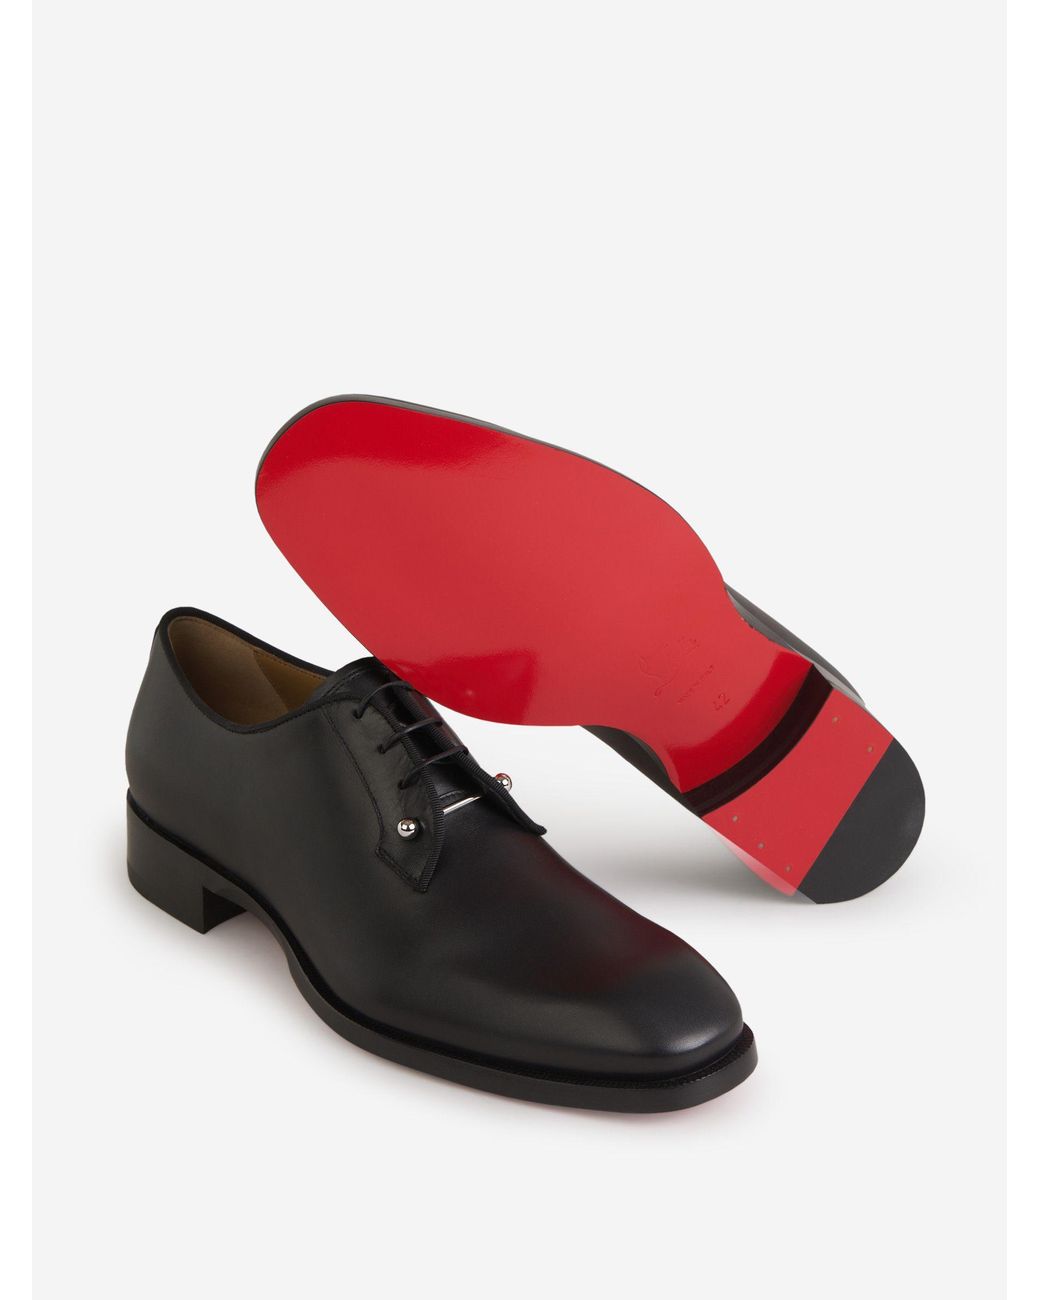 Christian Louboutin Chambeliss Leather Shoes in Black for Men